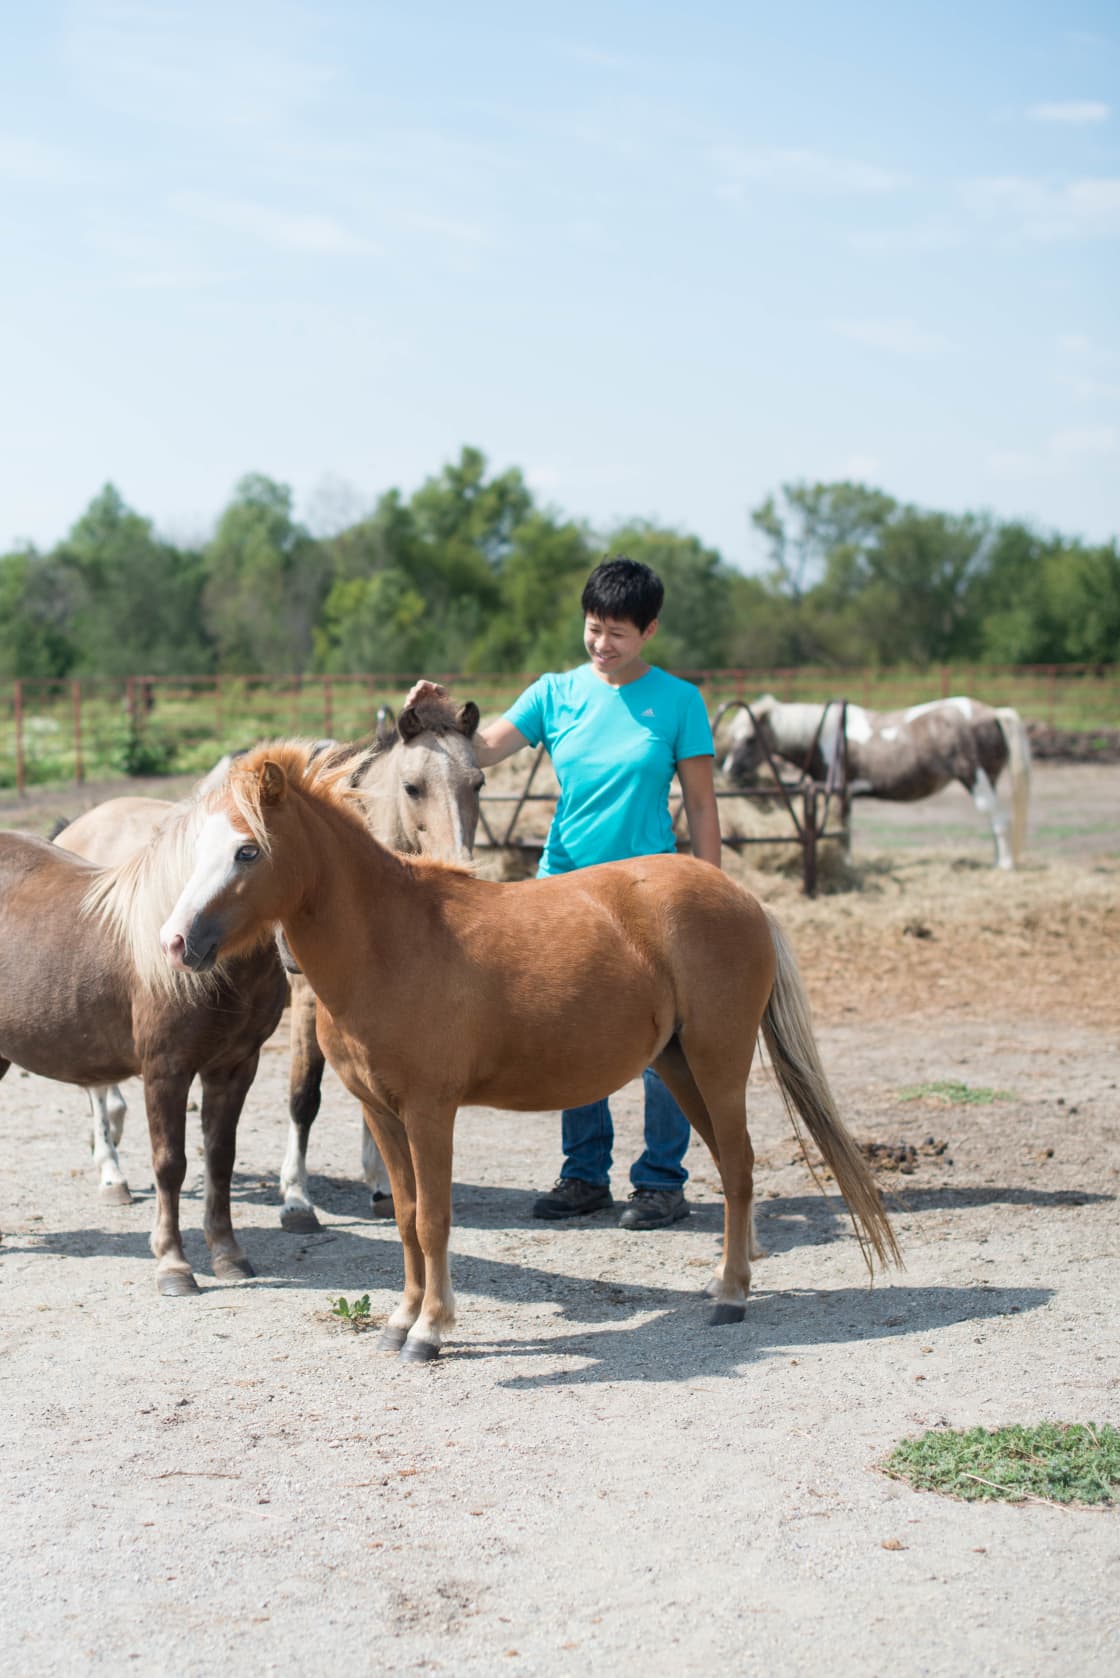 We couldn't get enough of these friendly mini horses!